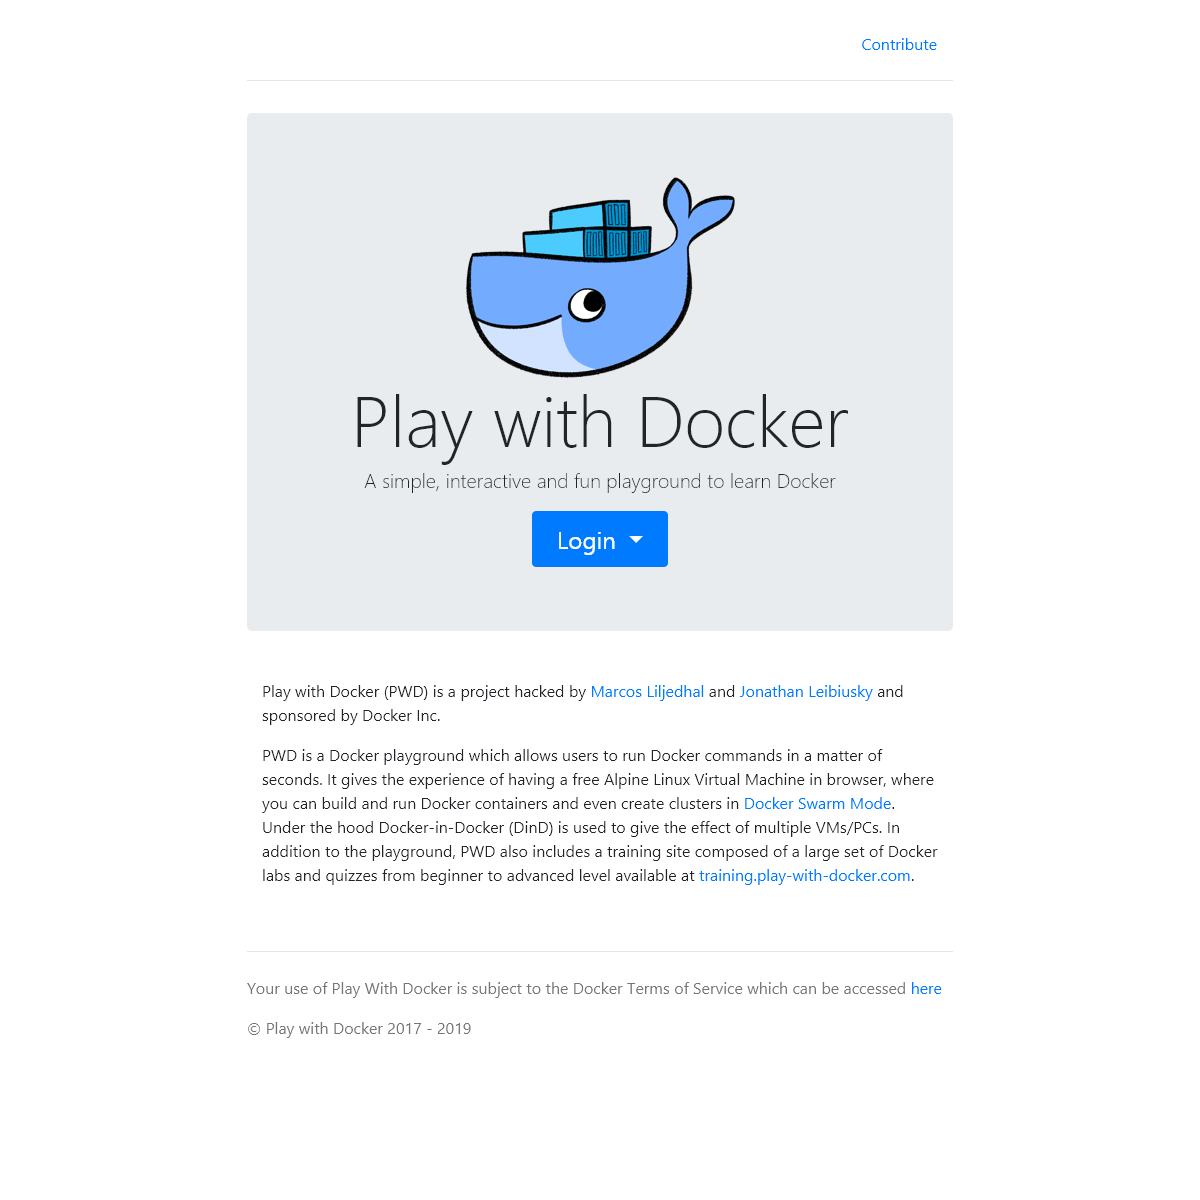 A complete backup of play-with-docker.com